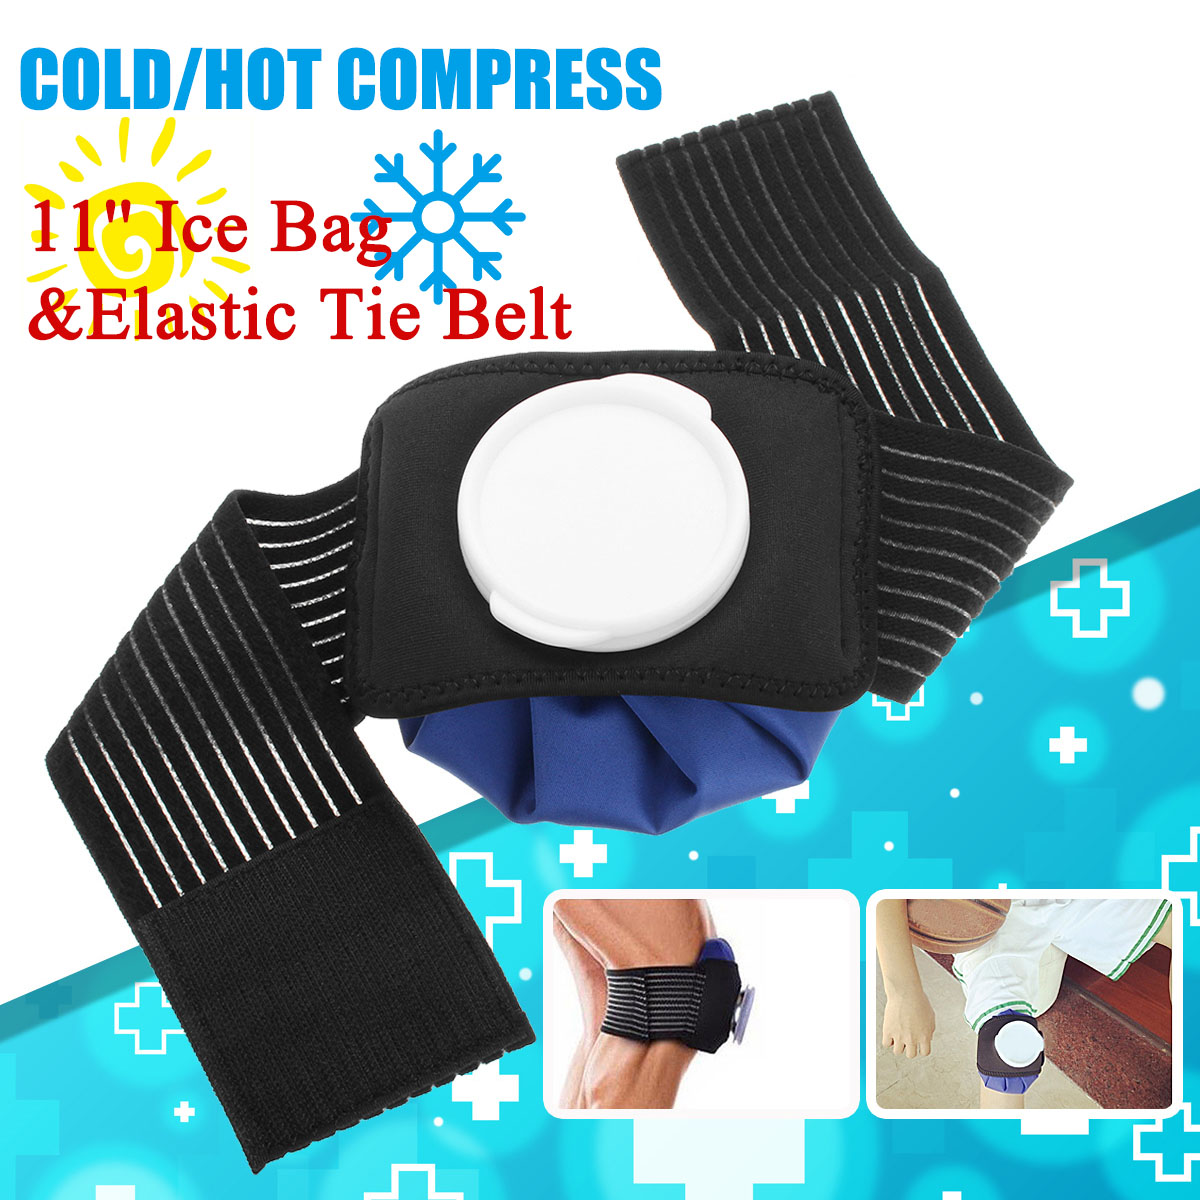 Ice-Bag-Pack-Pain-Relief-Cold-Broad-Knee-Shoulder-Injuries-Therapy-Strap-Wrap-Elastic-Tie-Belt-1551776-6